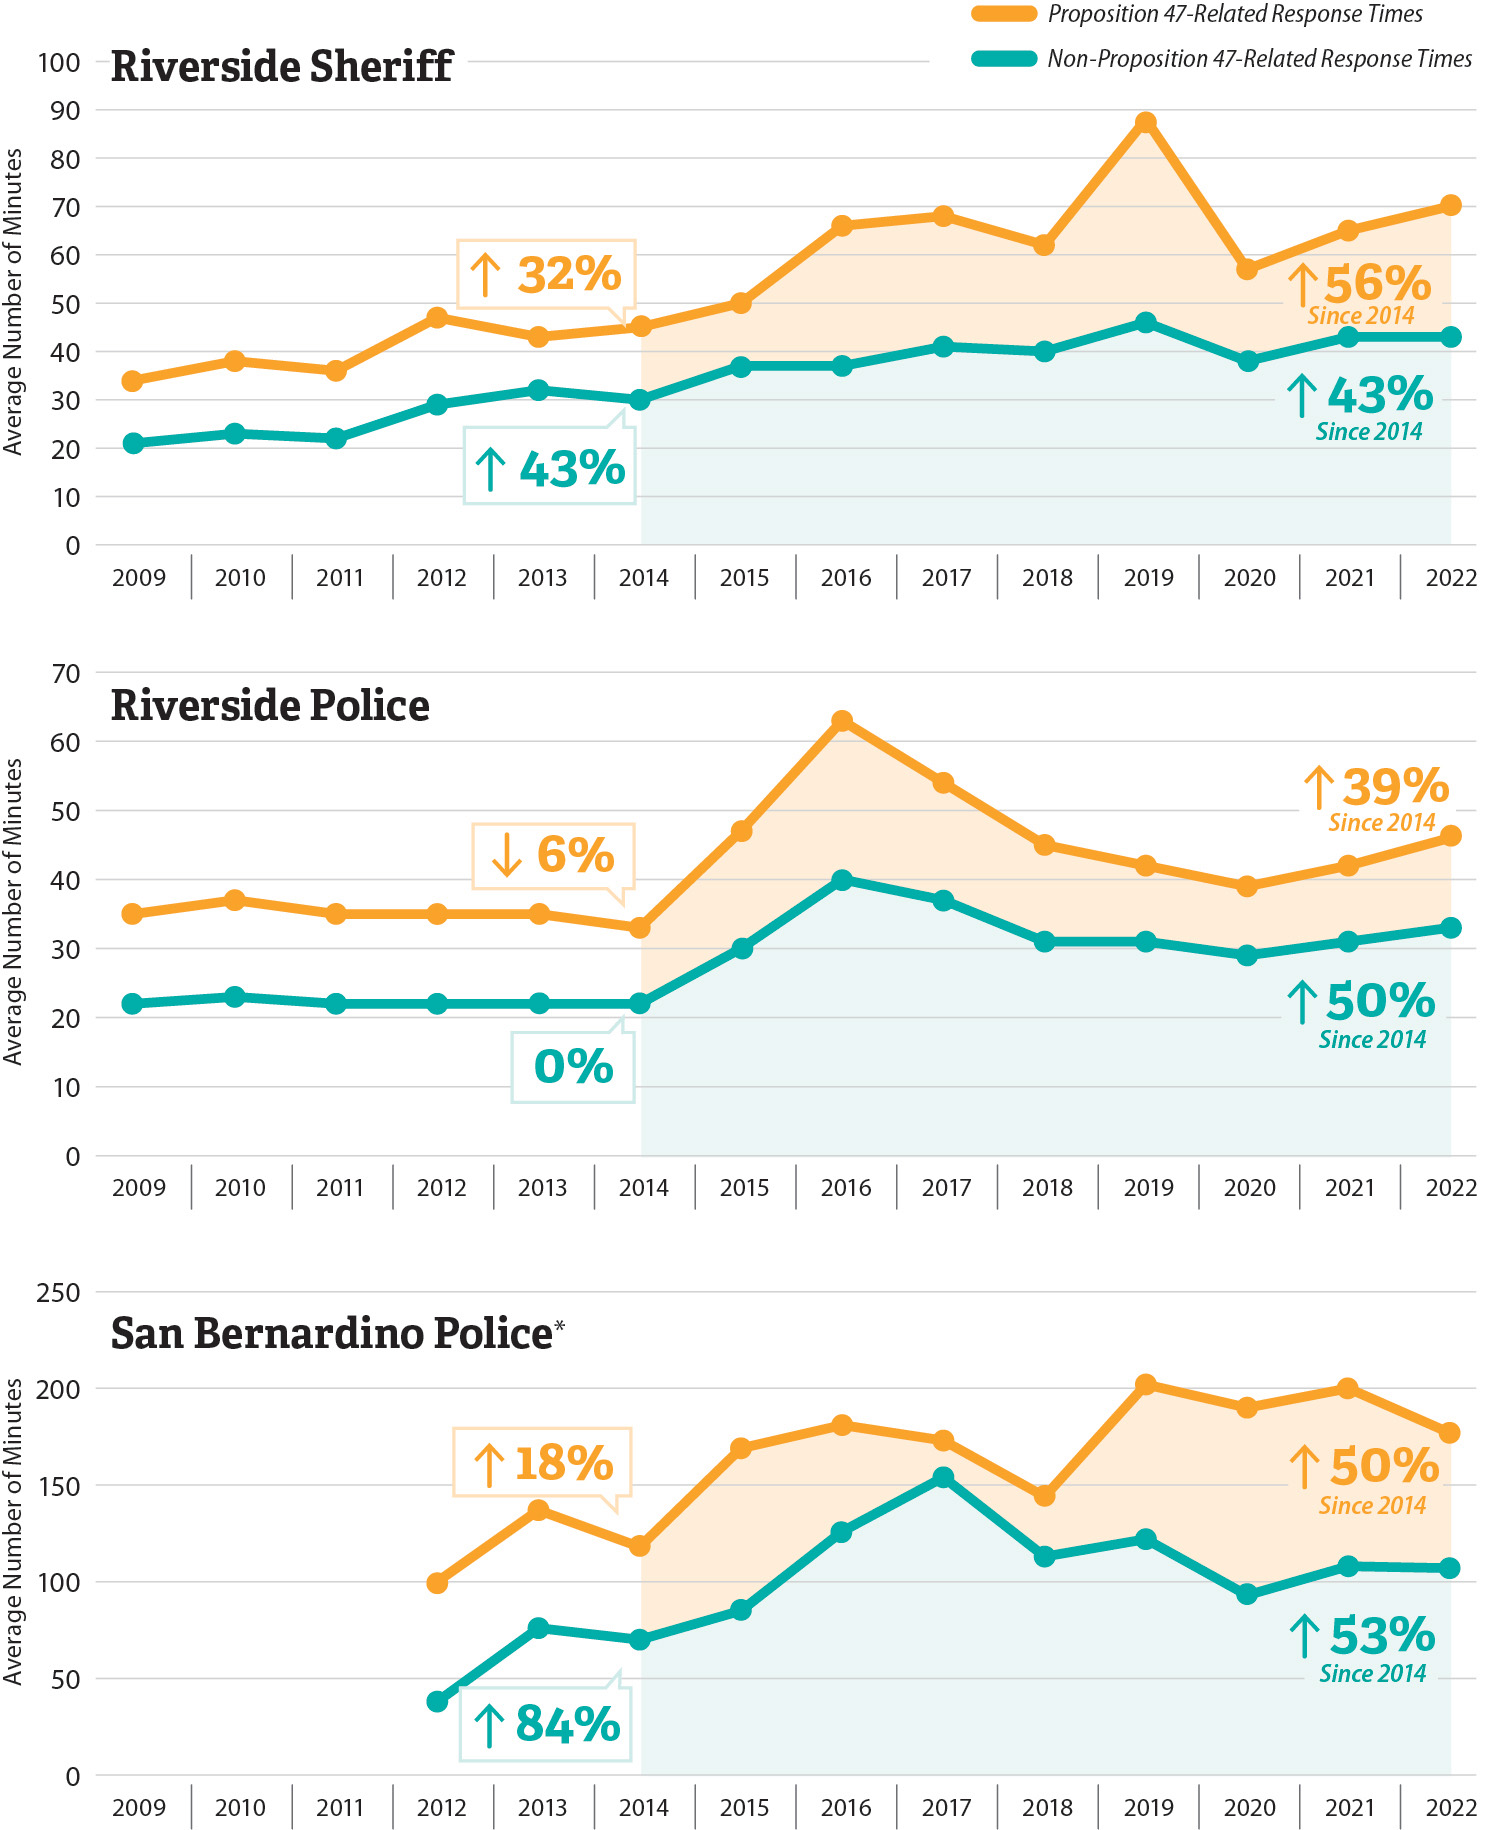 Figure 5 is comprised of three line graphs, one for each of the three law enforcement agencies that the auditors reviewed and they show that the response times of law enforcement agencies have increased for all crimes since before the implementation of Proposition 47.